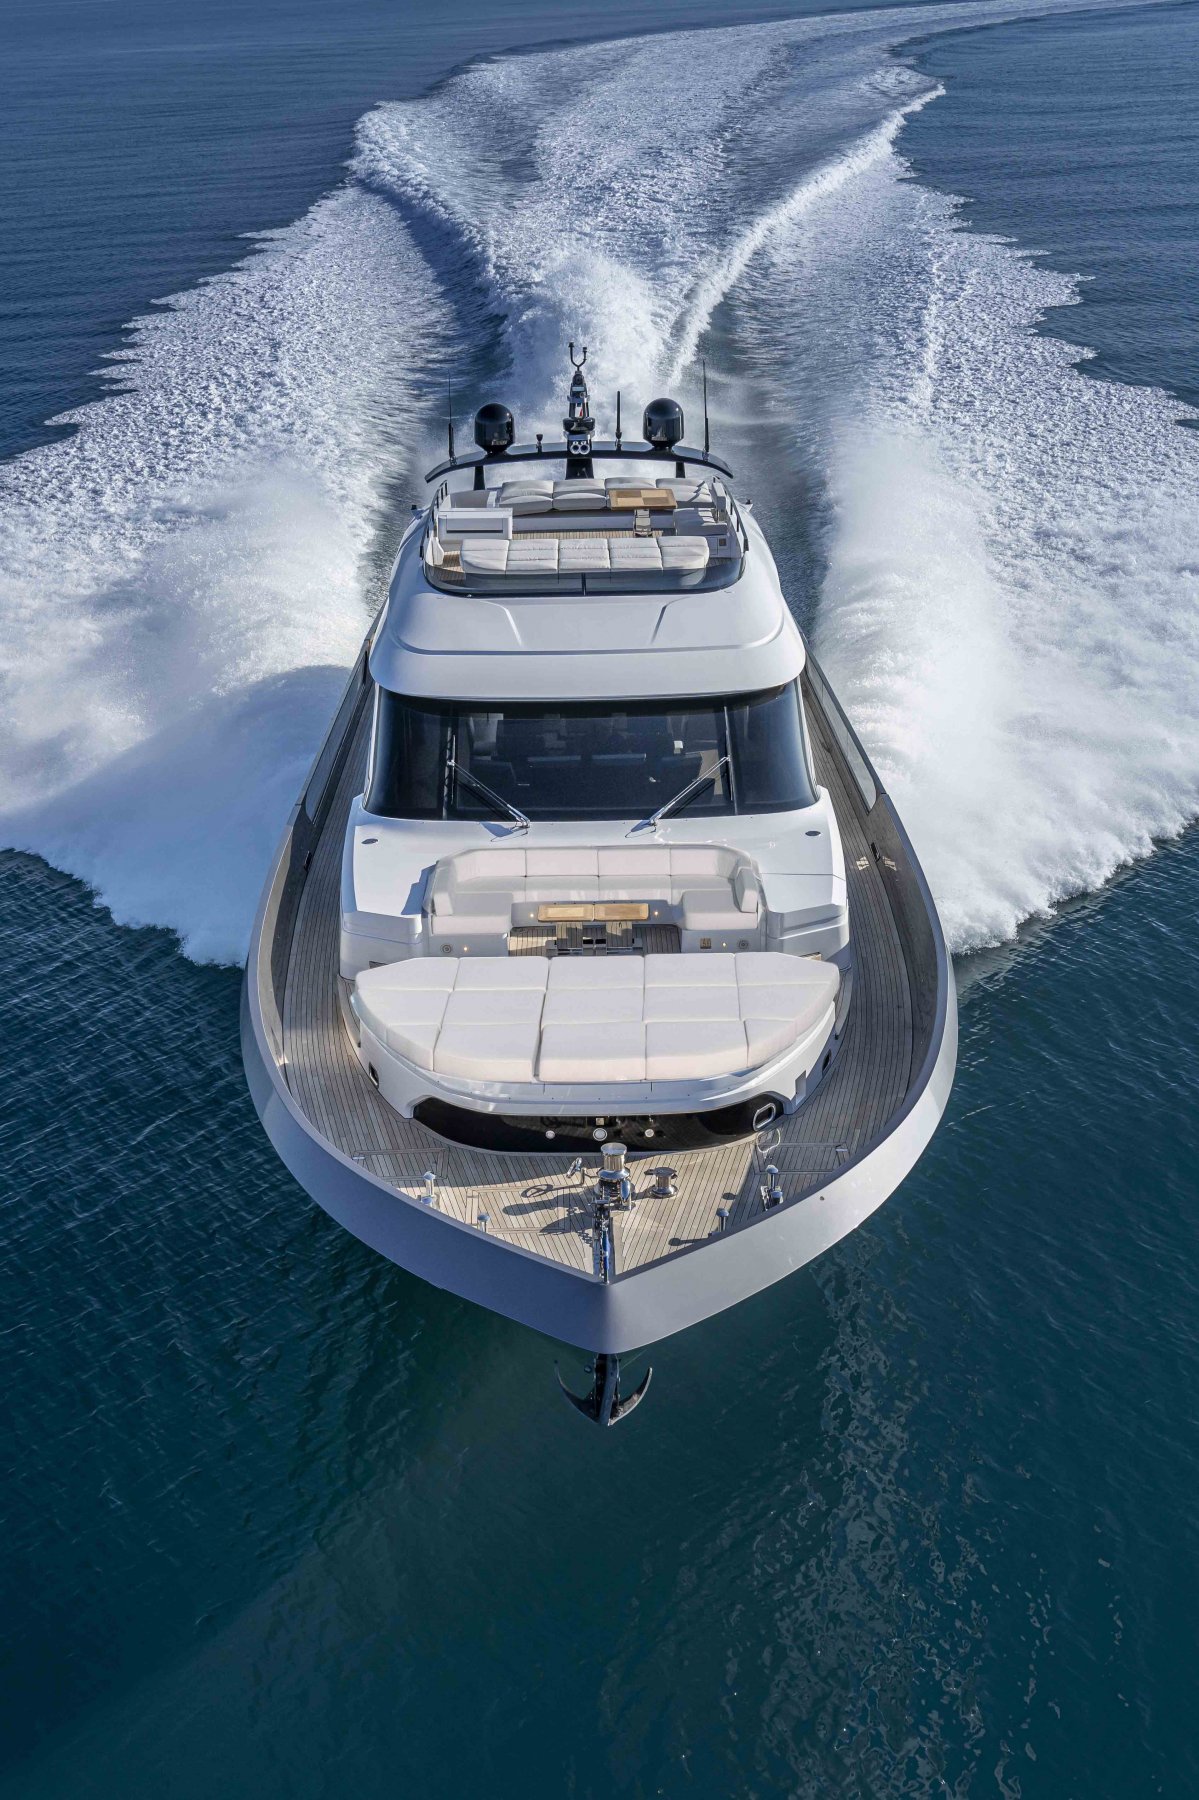 ab 58 yacht for sale